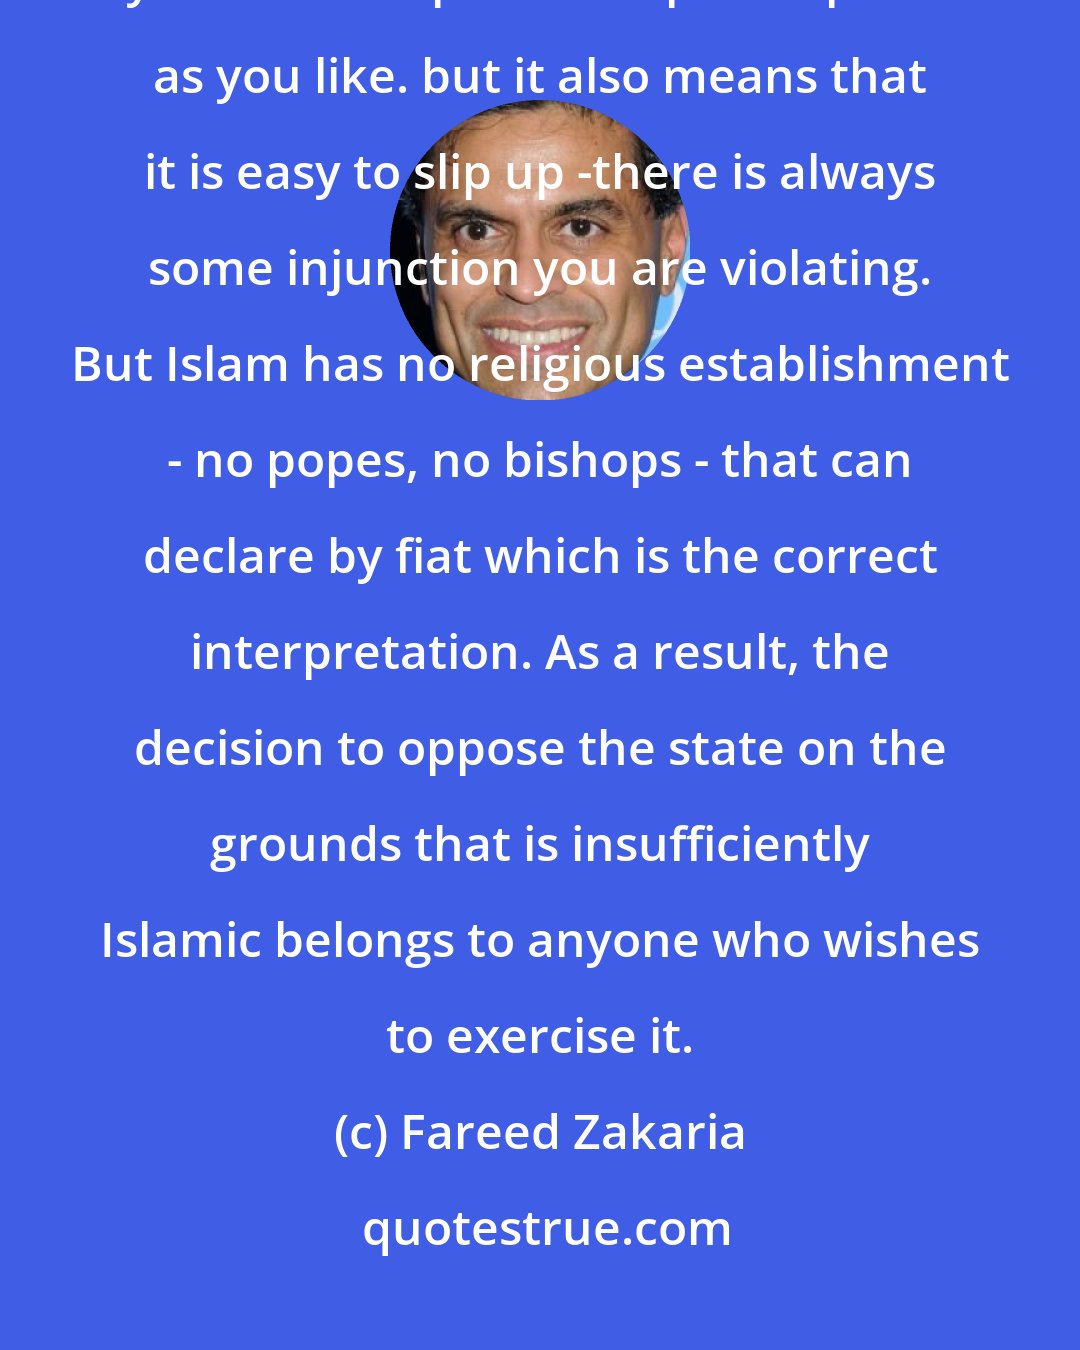 Fareed Zakaria: Religions are vague, of course. This means that they are easy to follow -you can interpret their prescriptions as you like. but it also means that it is easy to slip up -there is always some injunction you are violating. But Islam has no religious establishment - no popes, no bishops - that can declare by fiat which is the correct interpretation. As a result, the decision to oppose the state on the grounds that is insufficiently Islamic belongs to anyone who wishes to exercise it.